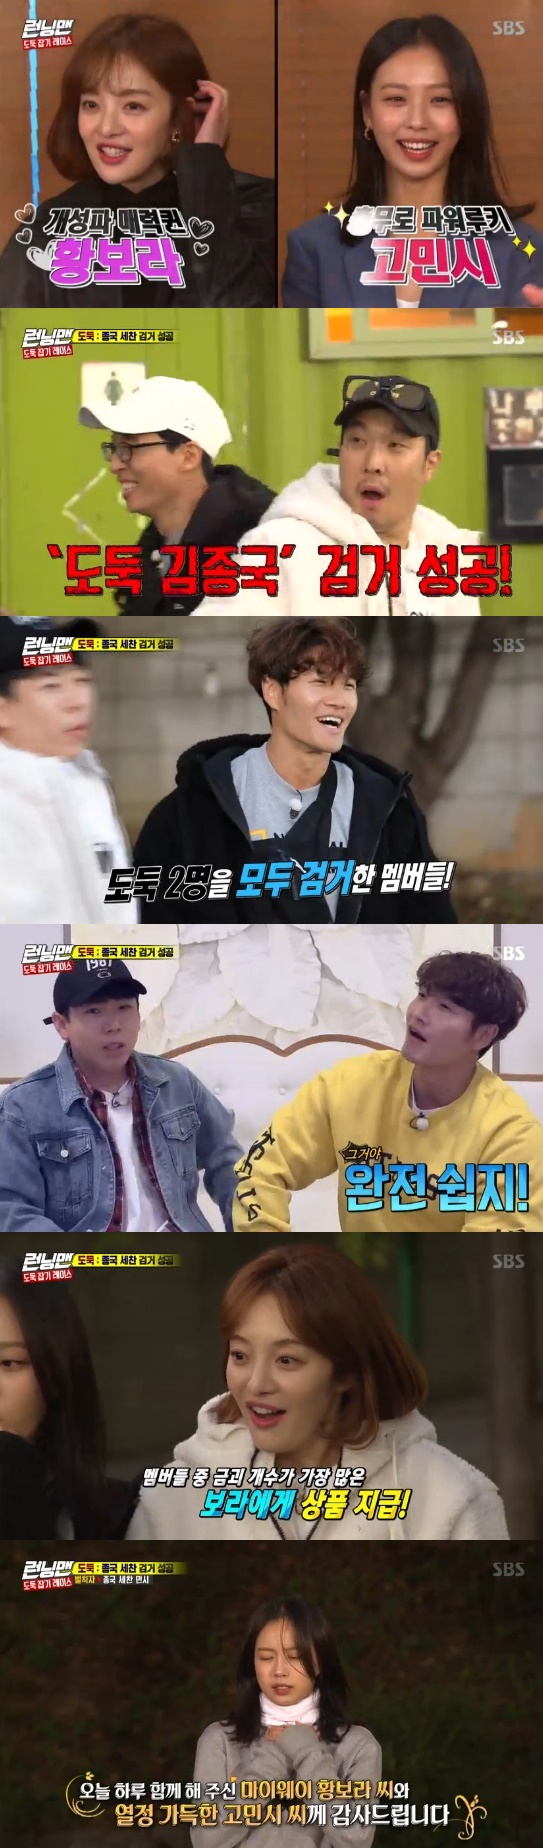 The Running Man thieves were Kim Jong-kook, Yang Se-chan.On the 27th SBS Good Sunday - Running Man, Go Min-si and Hwang Bo Ra appeared as guests.On the day, Race was caught with an eye open and a nose cut thief, with two thieves.Thieves perform the Hidden mission, steal Gold paid to the members, and collect 10 without being caught in Identity.However, if two thieves are in one team, the successful Hidden mission is invalid, and the Gold of the members is maintained.Random dance showdown number one was Hwang Bo Ra. Hwang Bo Ra chose Jeon So-min as a team member, while Song Ji-hyo chose Go Min-si.When the members said, If you two dance, I will get crazy. Jeon So-min and Hwang Bo Ra danced together to the agitation and laughed.After the first mission, the number of Golds acquired by the thief was four.Haha suspected that the light was Park Jae-seok hitting his brothers four ships, and Ji Suk-jin pointed to Yoo Jae-Suk as a lot of mission is Park Jae-seok.Go Min-si took Yang Se-chan and sent Ji Suk-jin.The second mission was Protect Your Name, with Lee Kwang-soo and Yoo Jae-Suk in disguise.However, Yoo Jae-Suk was quickly caught by the citizens, and was named 20 times; then, Jeon So-min and Song Ji-hyo went out without disguise.Jeon So-min took off his hat and laughed when no one called his name, even calling his name while playing a penalty of Park Jang-daeso.Its just people thinking of themselves as crazy people, Lee Kwang-soo said.The number of Golds of thieves remained four; members speculated that the thieves must be on the same team.Yoo Jae-Suk, Ji Suk-jin, Haha and Yang Se-chan became Hwang Bo Ra team.After the subsequent mission, the number of Golds by thieves was 19; the vote began, with members claiming they had lost Gold to each other.The vote resulted in Yang Se-chan and Kim Jong-kook receiving seven and five votes respectively, making them a judgement; both were thieves.Hwang Bo Ra, with the largest number of Golds, won the prize, and Go Min-si, who failed to hit a thief, was penalized.Photo = SBS Broadcasting Screen